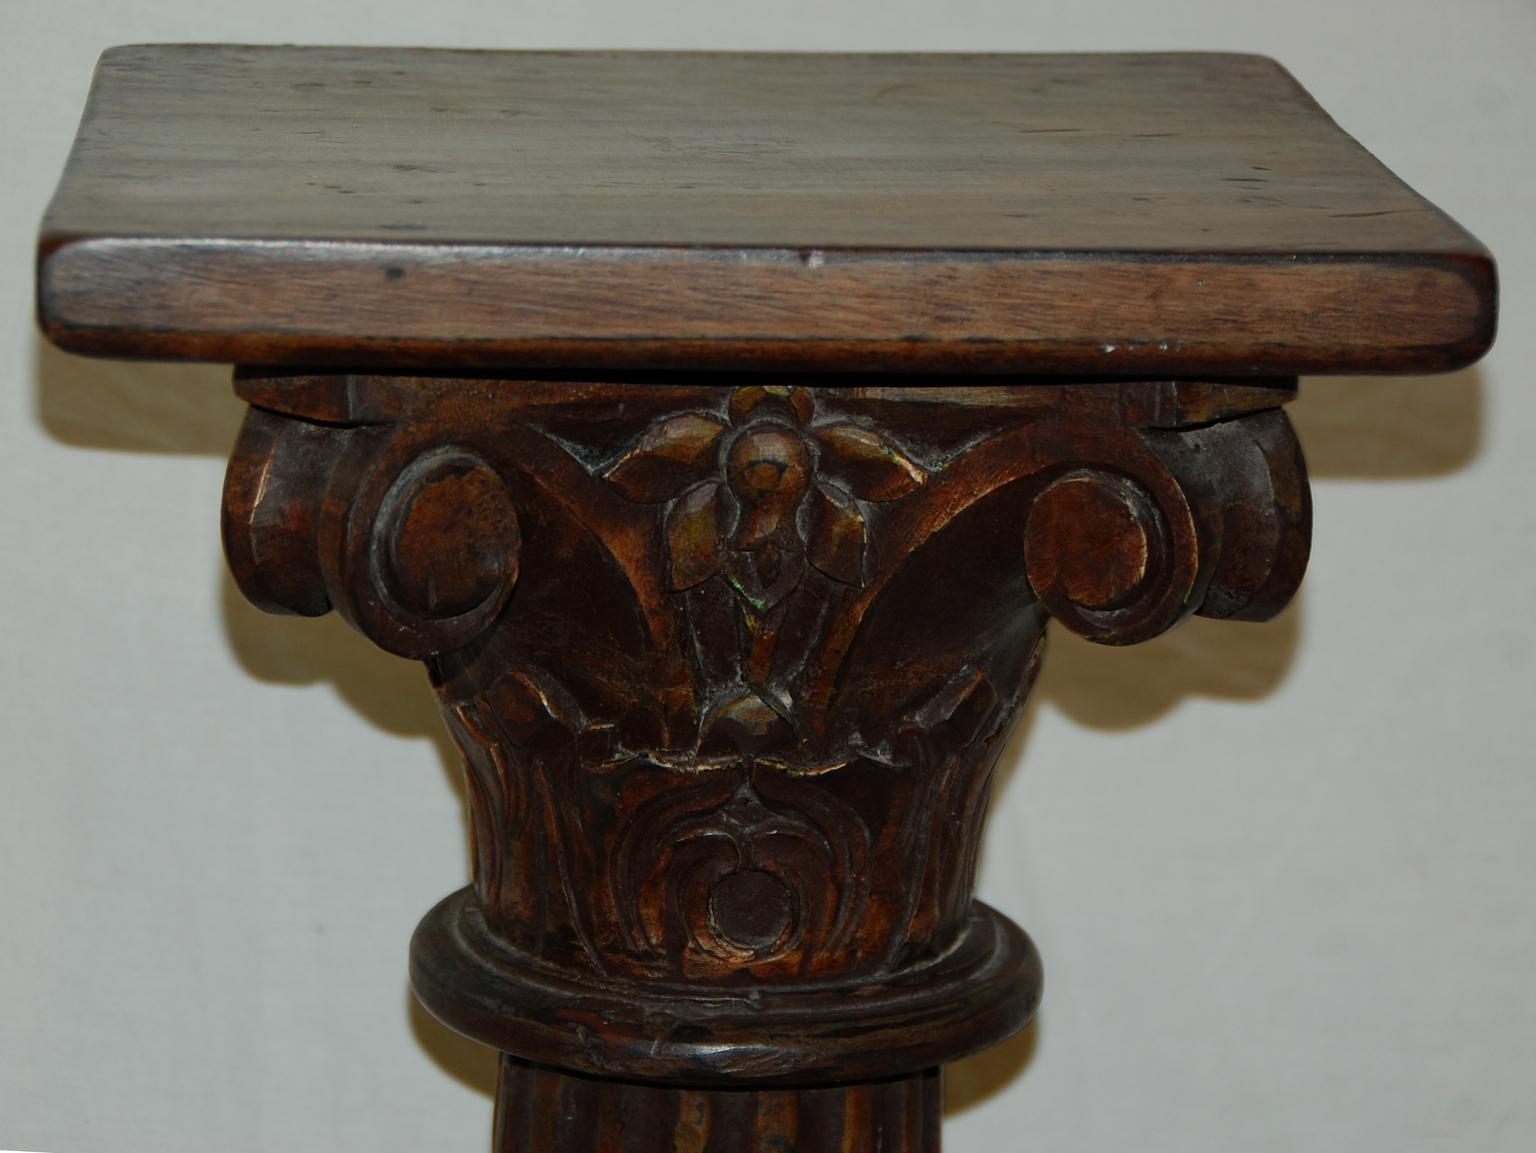 English 19th century carved wooden Corinthian column, used as a pedestal for displaying objets or lighting. The, carved capital and reeded column rest on a stepped carved base. Late 19th century. 46 3/4 inches high.